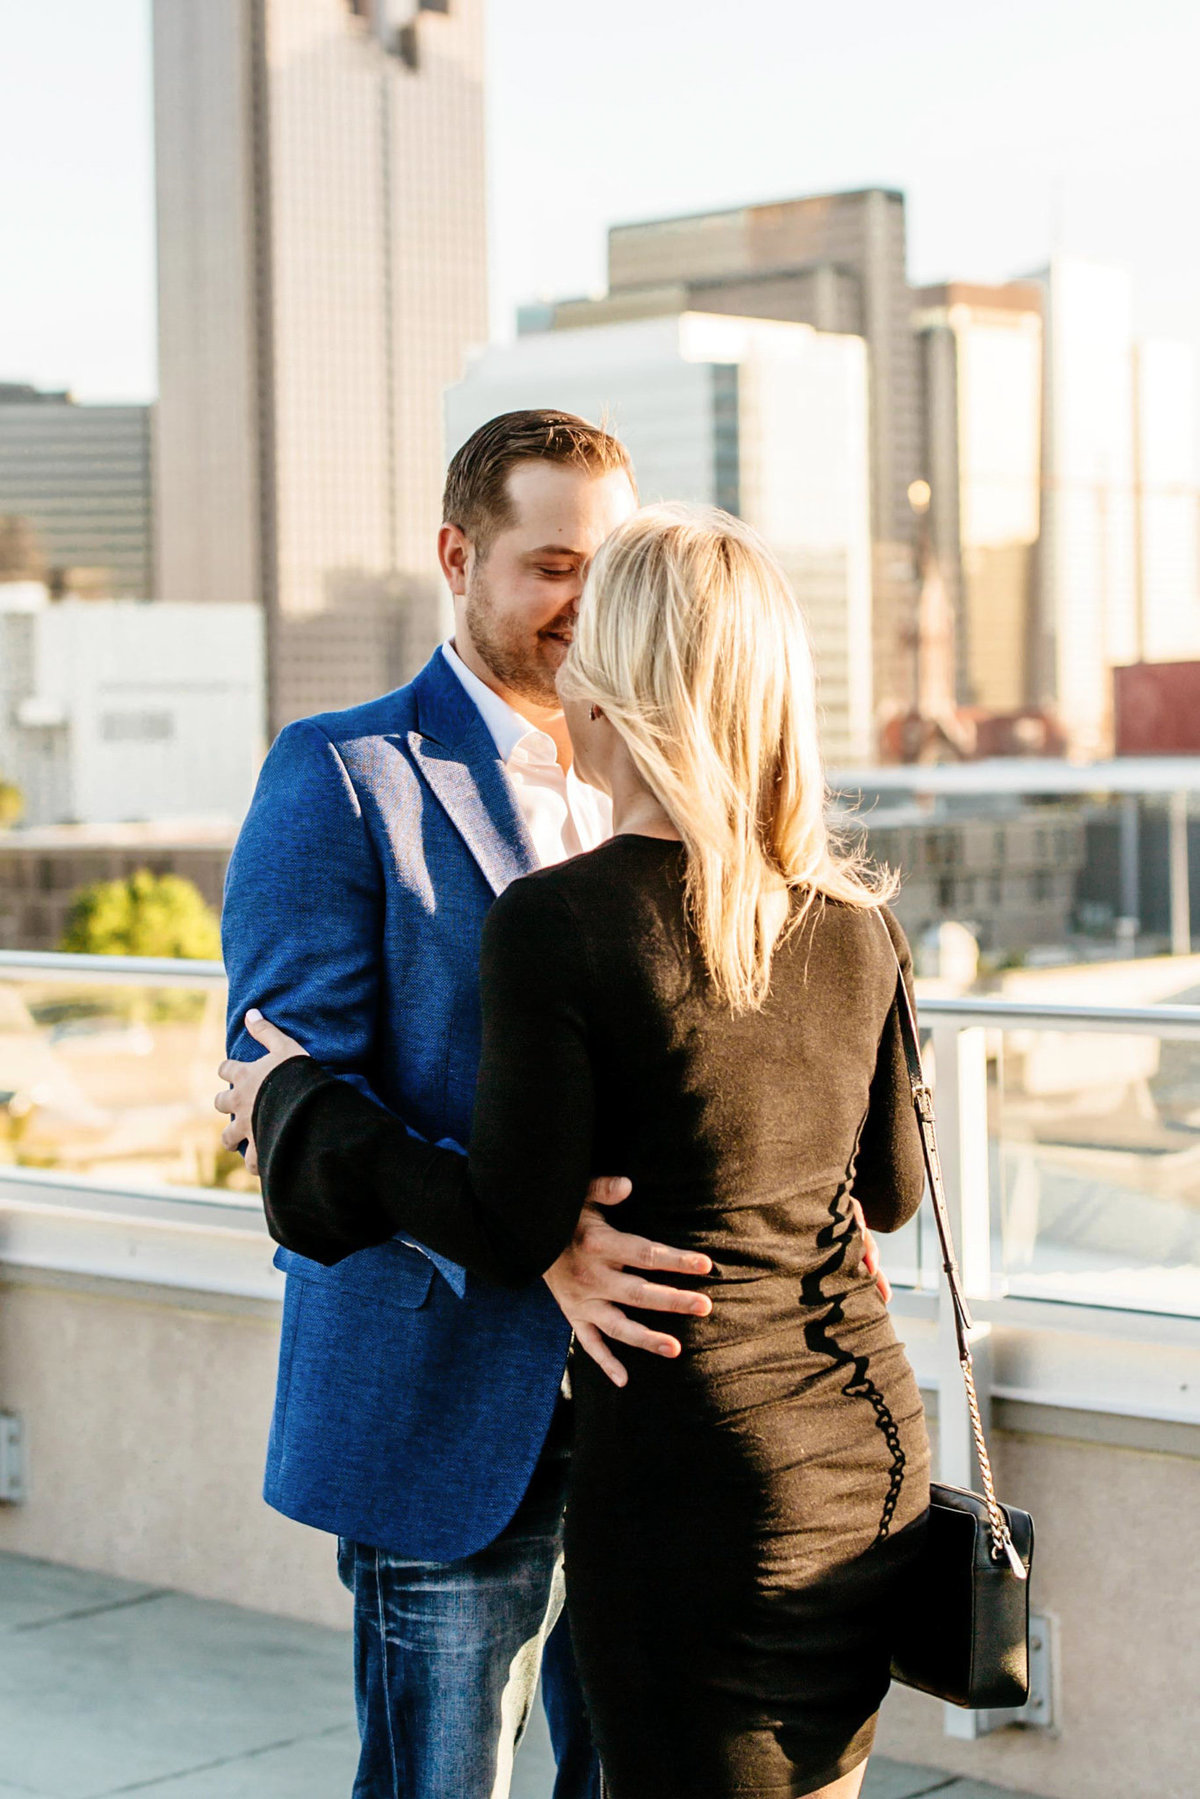 Eric & Megan - Downtown Dallas Rooftop Proposal & Engagement Session-16